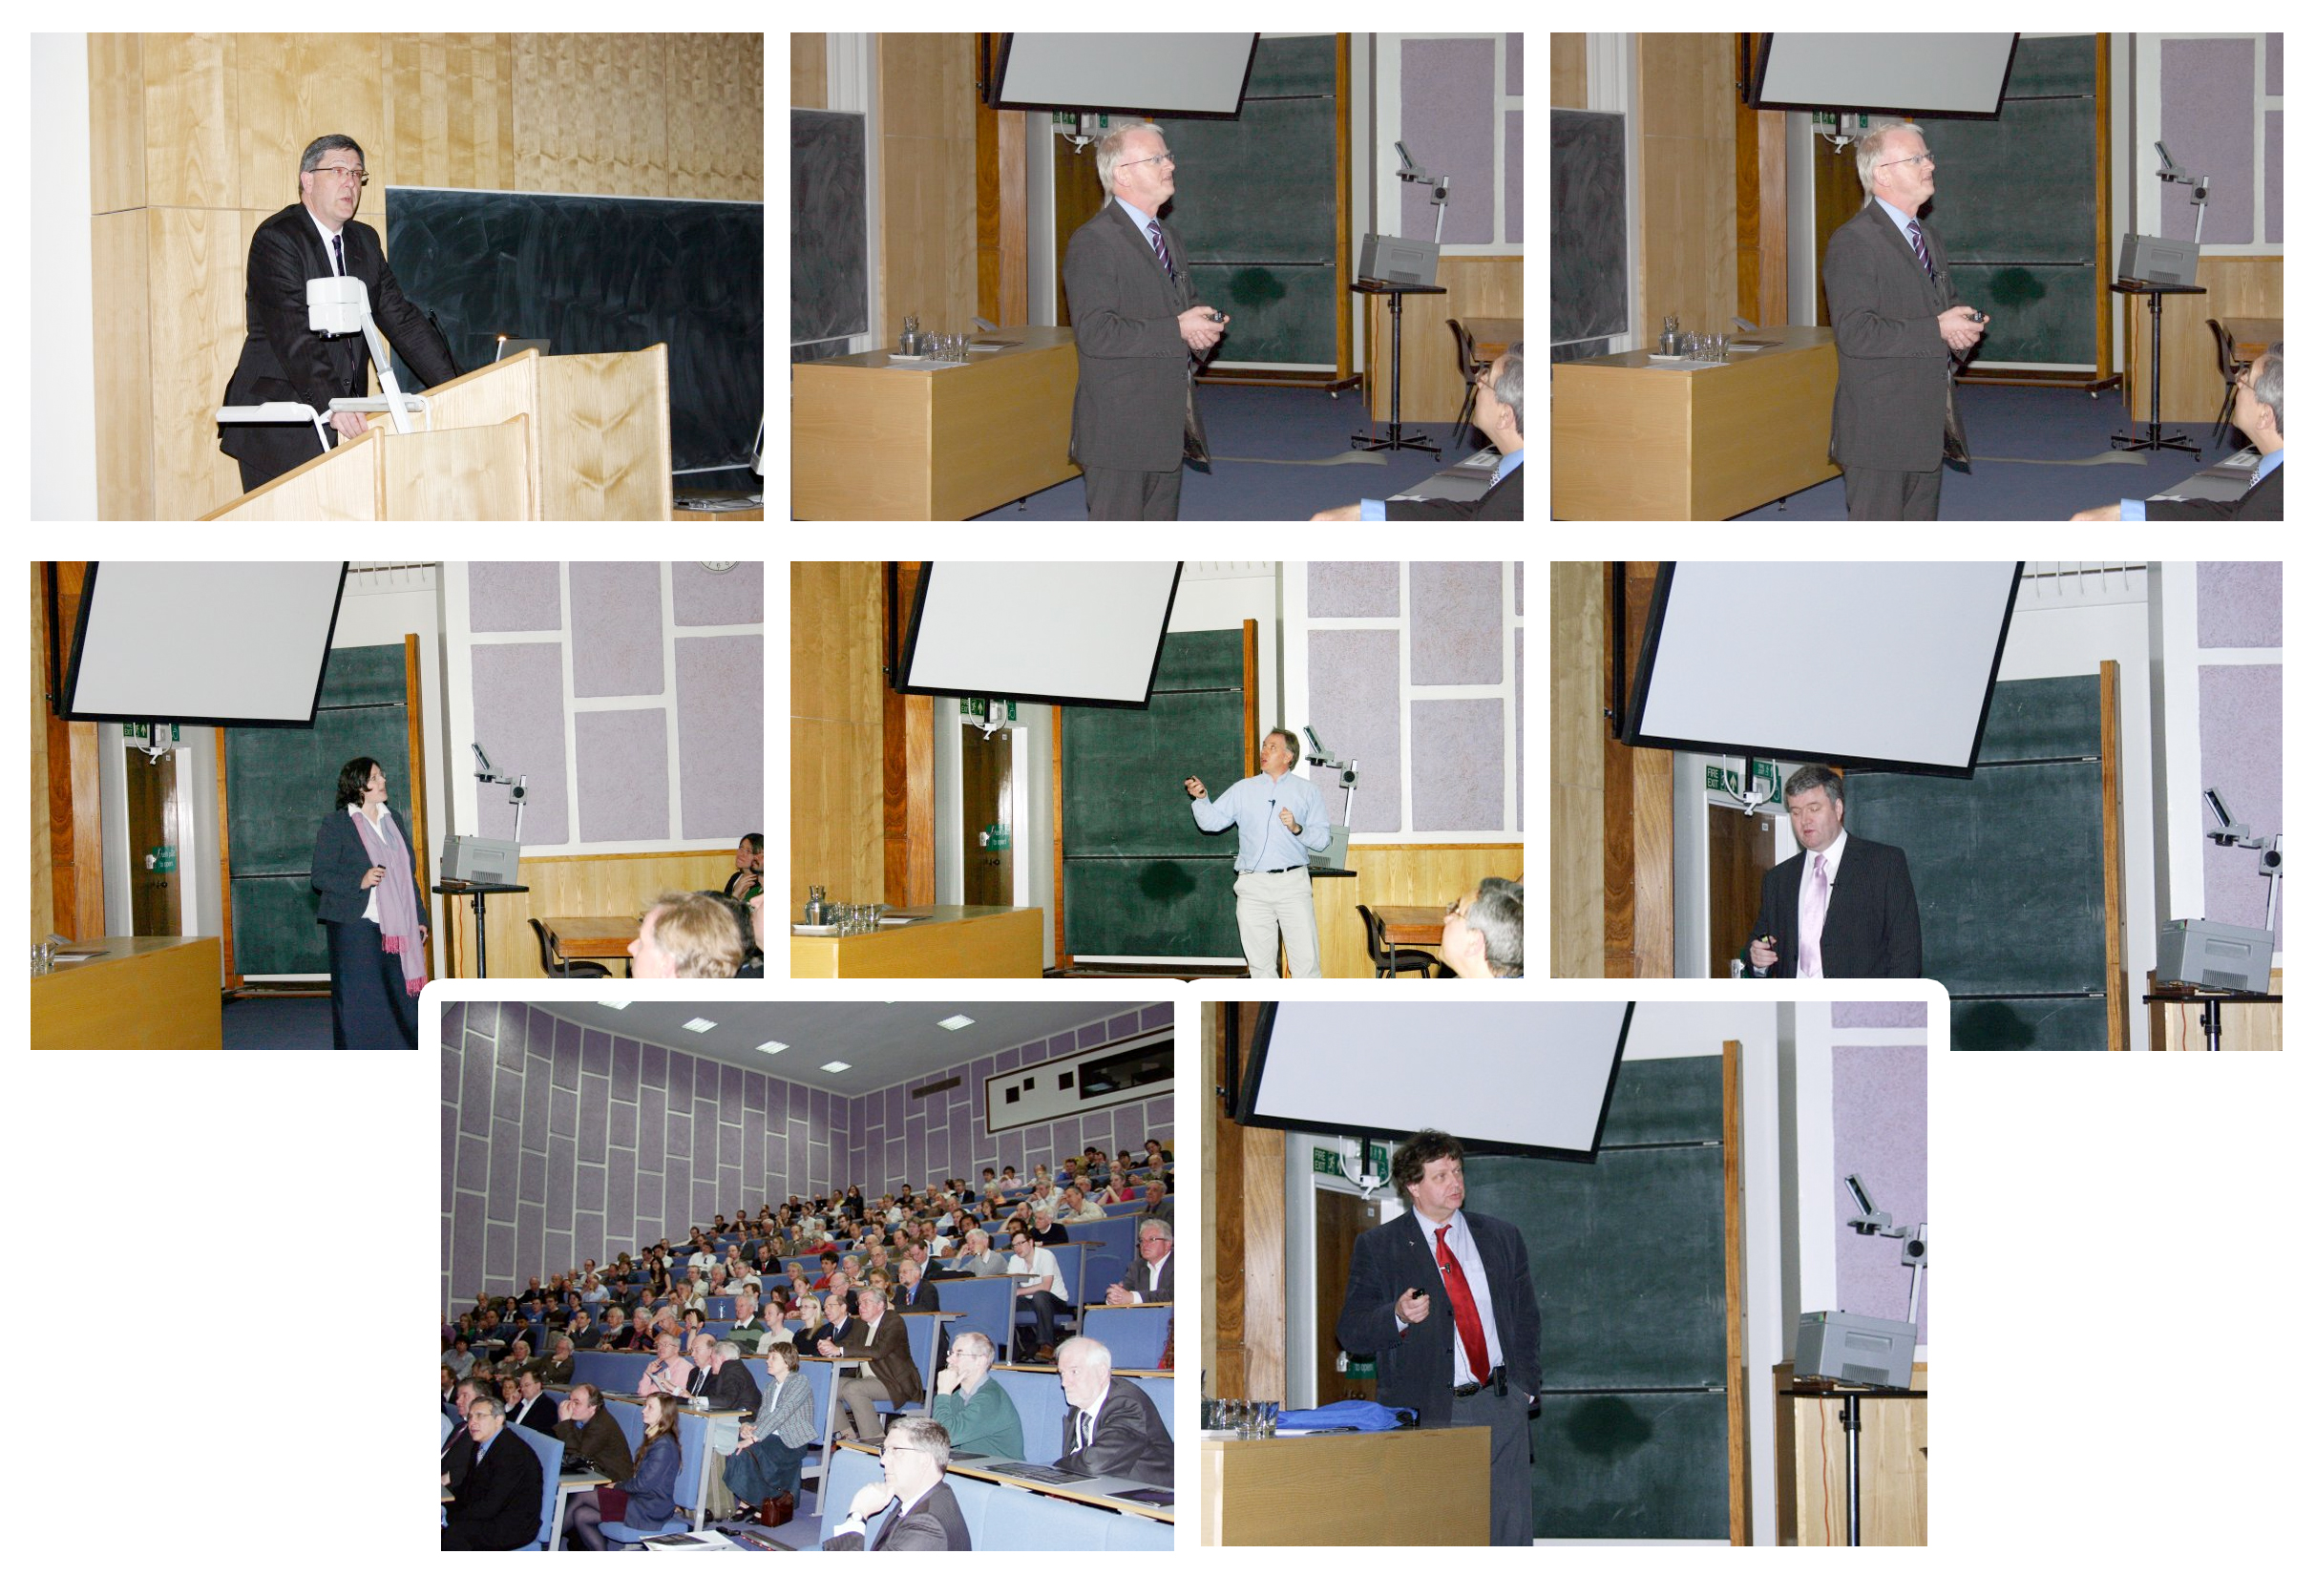 Ogden @ 5 Lecture pictures montage